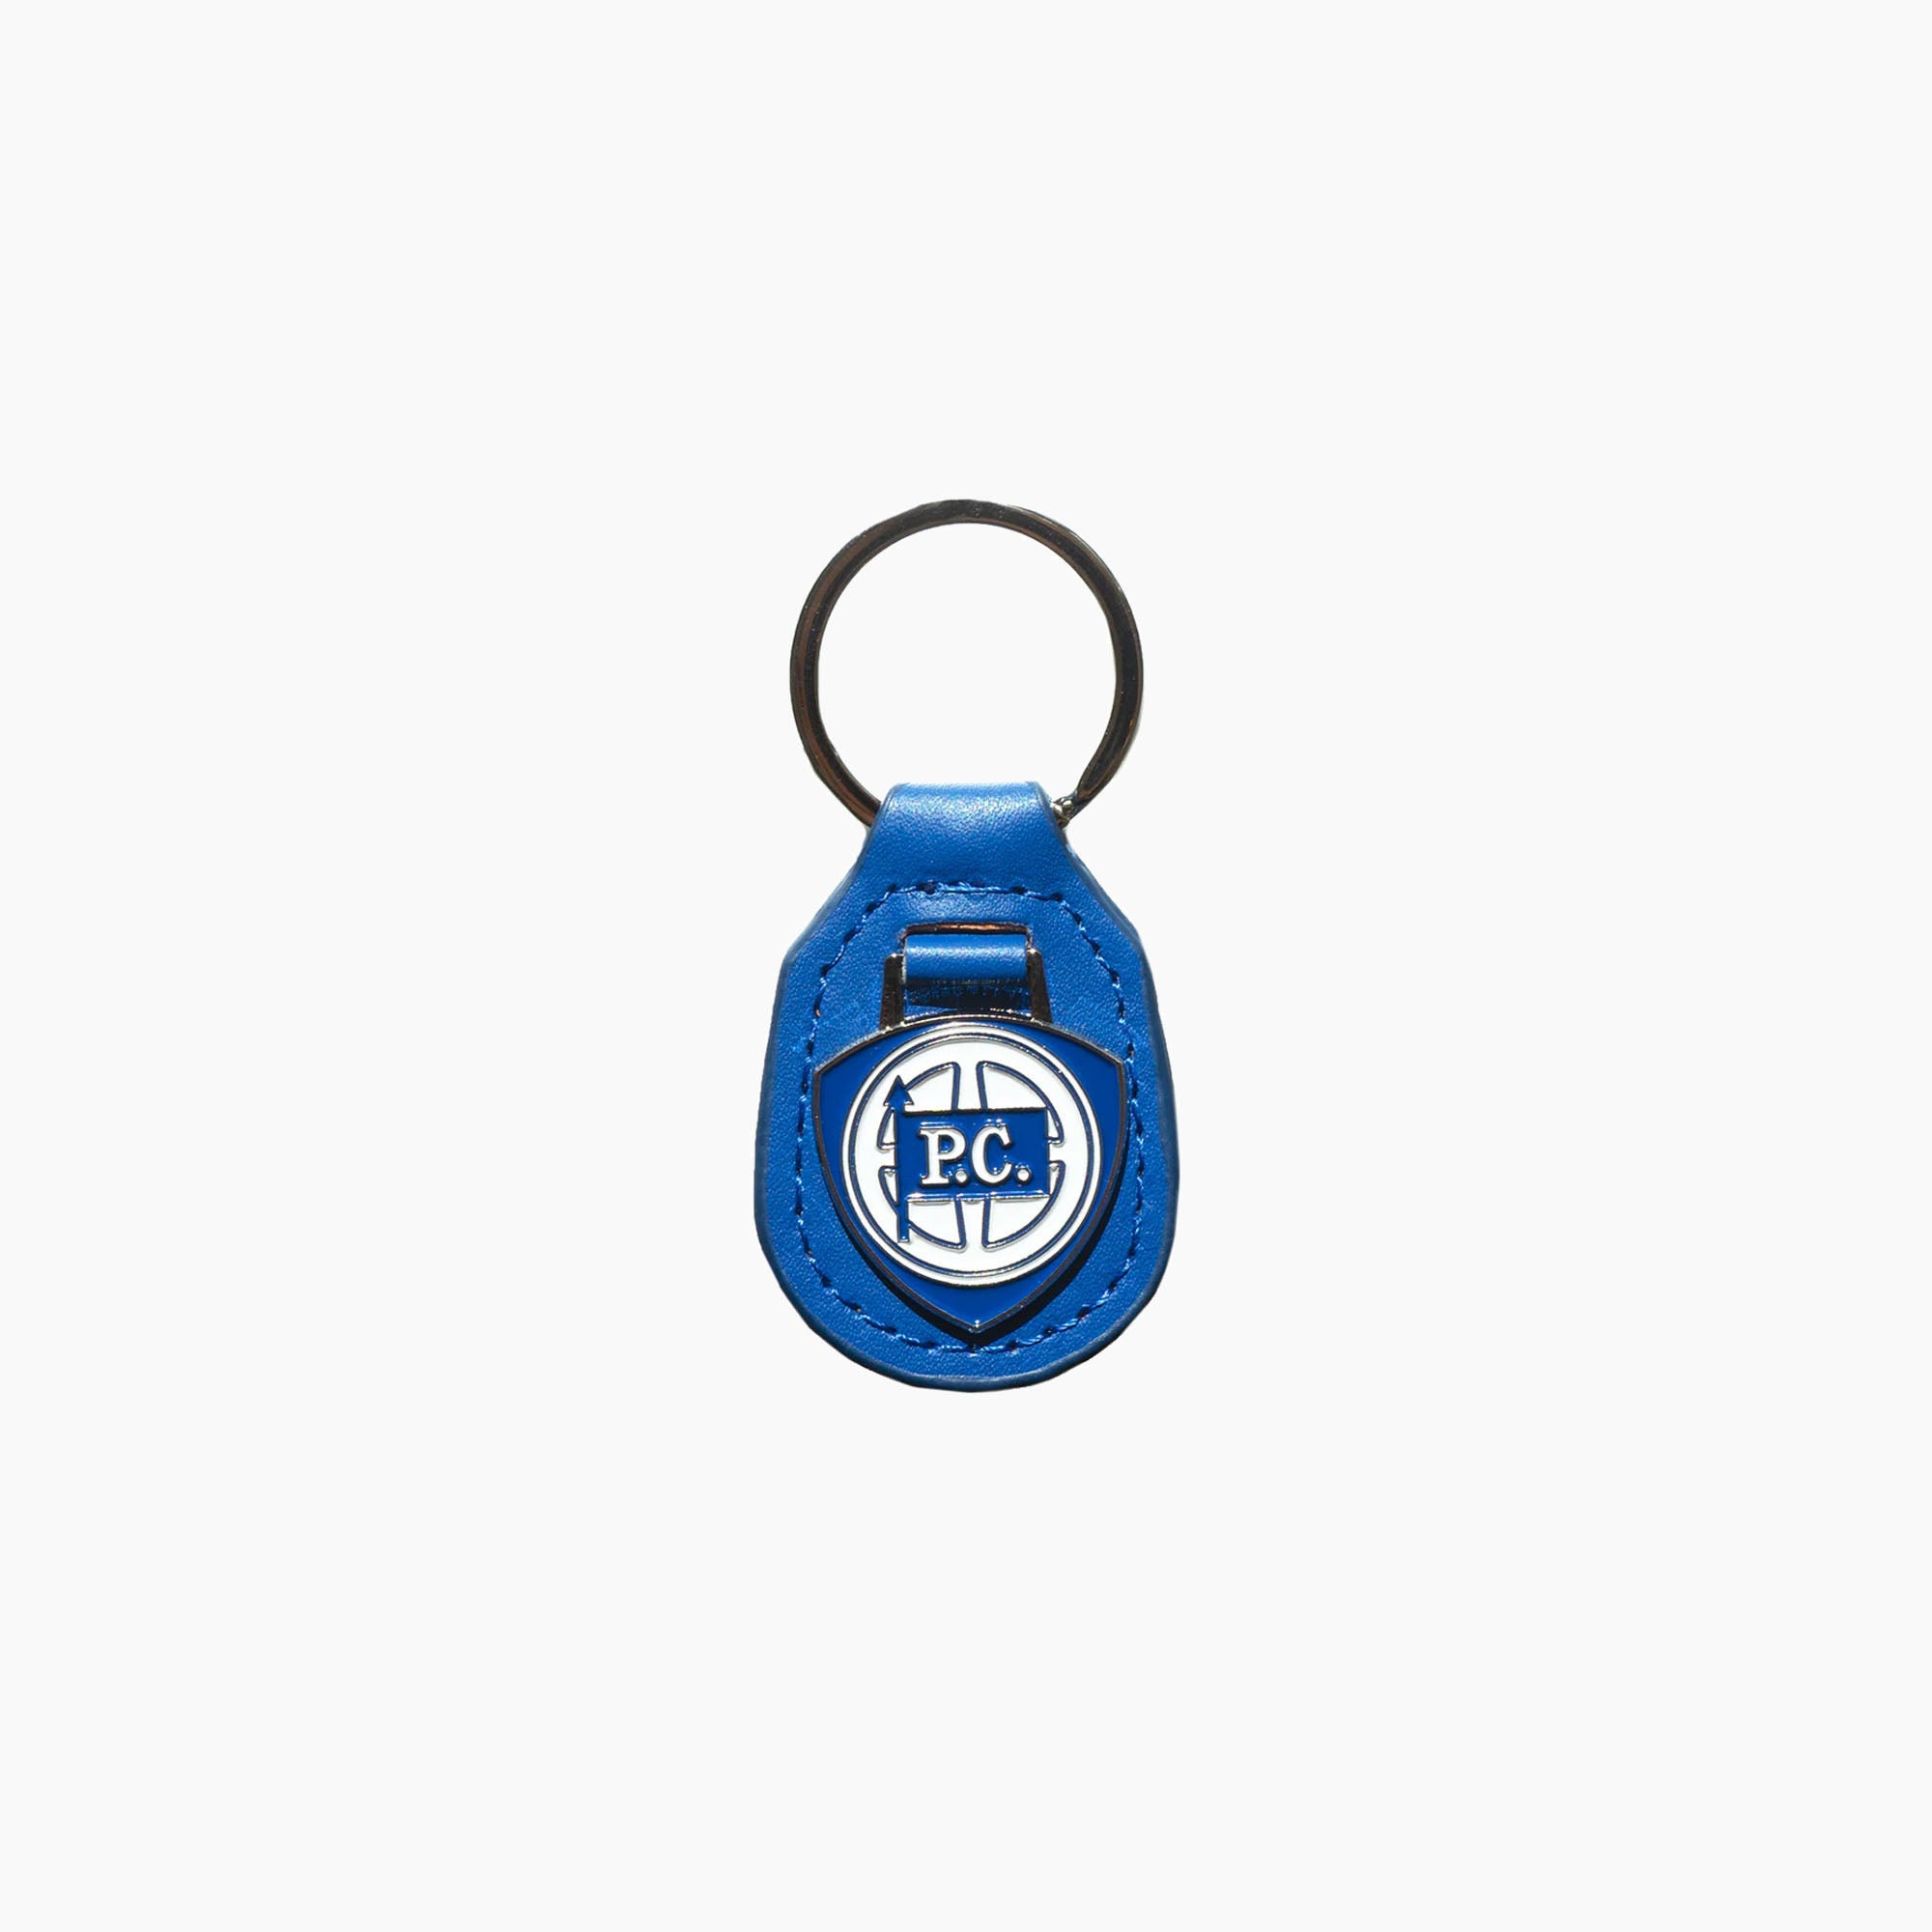 Period Correct | Delta Leather Keychain-Keychain-Period Correct-gpx-store